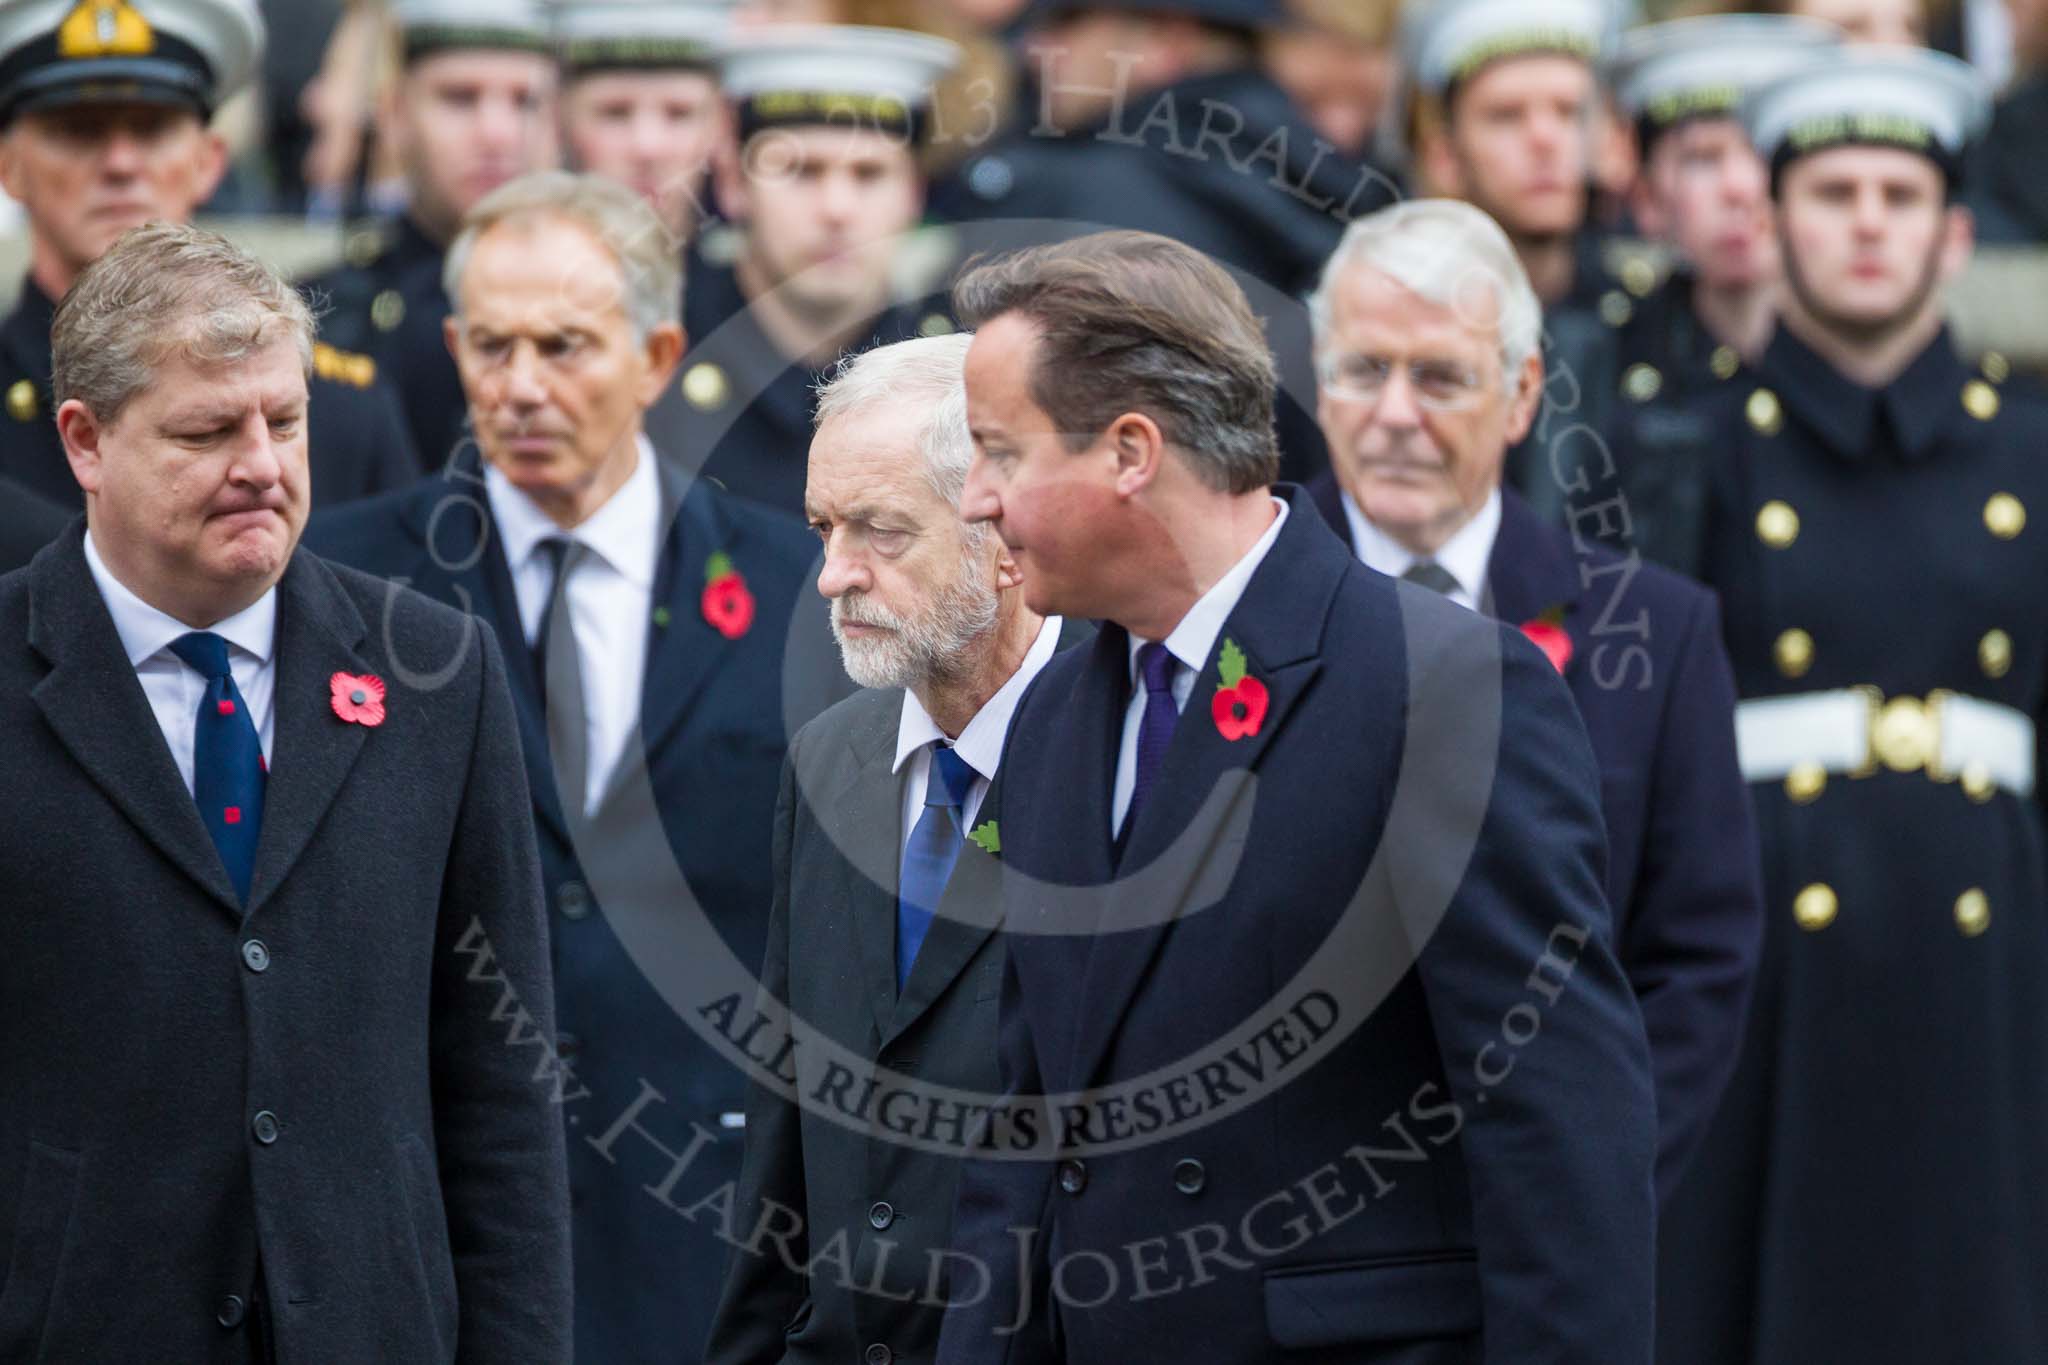 Remembrance Sunday at the Cenotaph 2015: The Prime Minister, David Cameron, and the official leader of the opposition, Jeremy Corbyn, on the way back to the Foreign- and Commonwealth Office. Image #324, 08 November 2015 11:21 Whitehall, London, UK